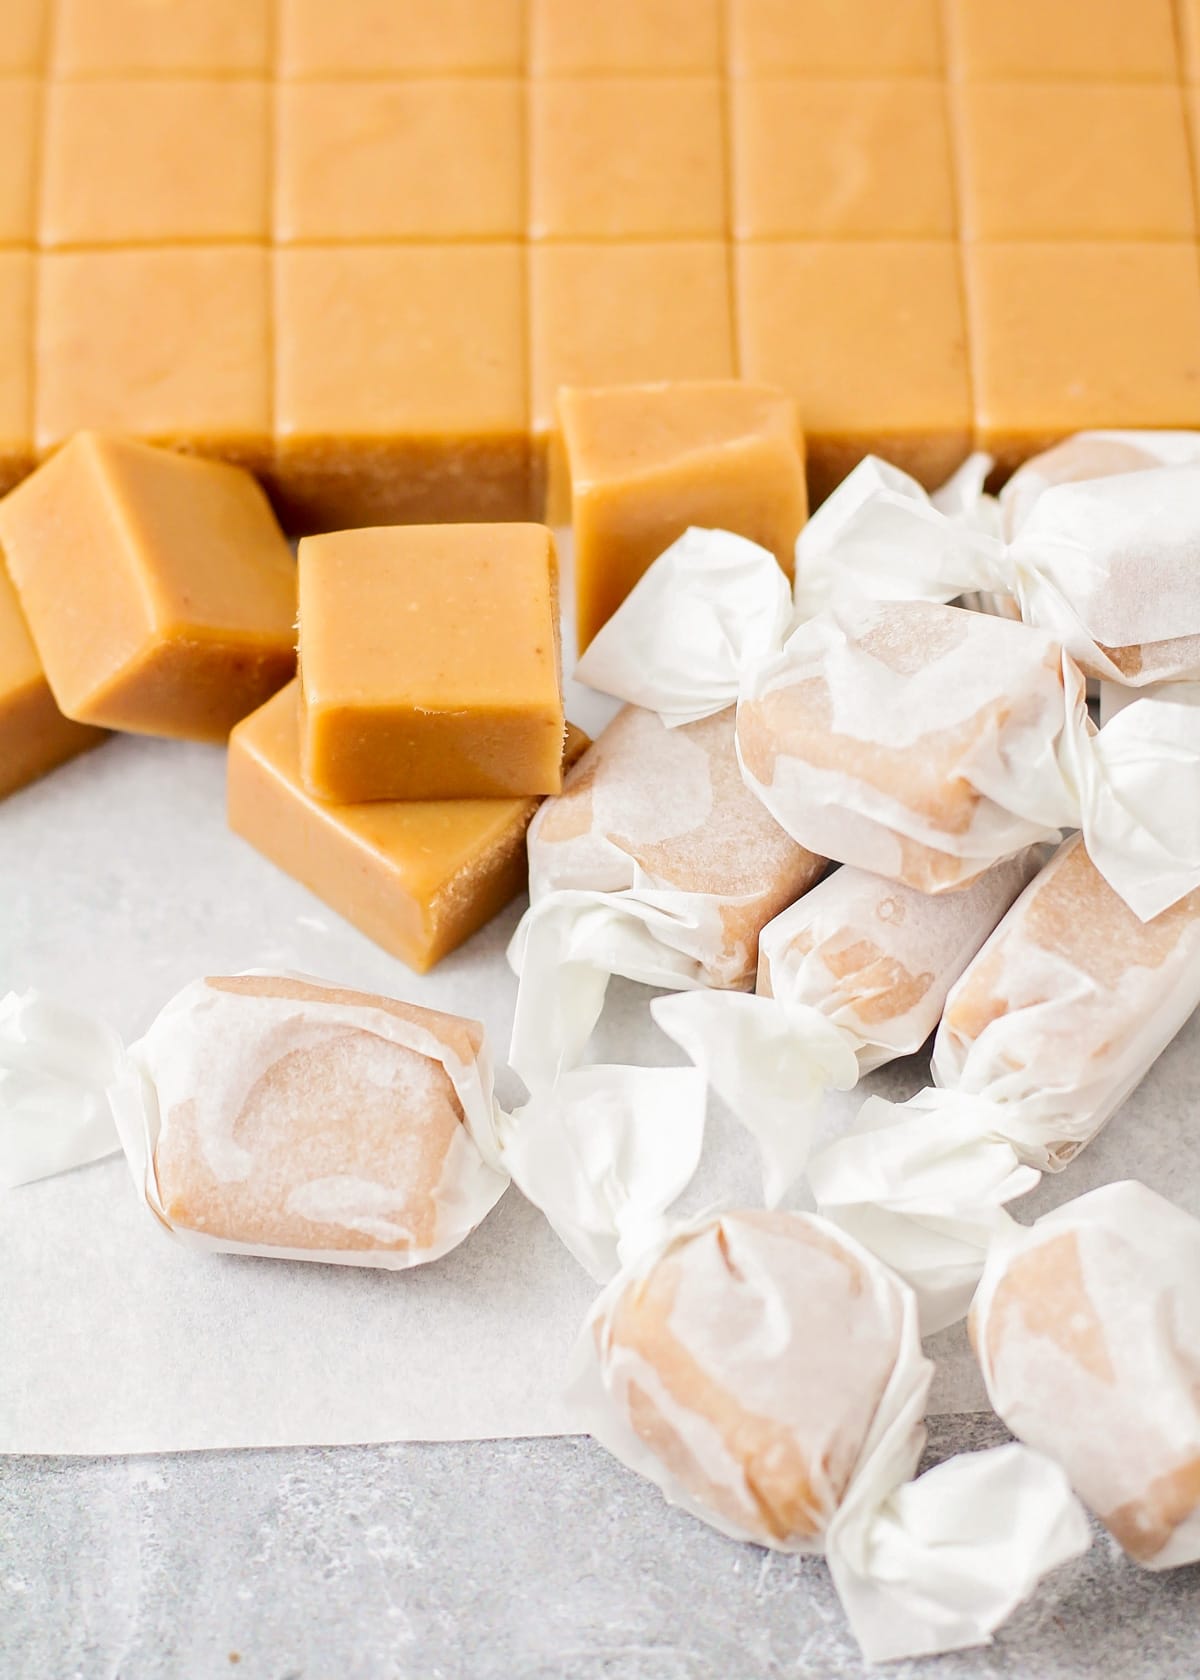 Homemade caramels cut and wrapped in wax paper.